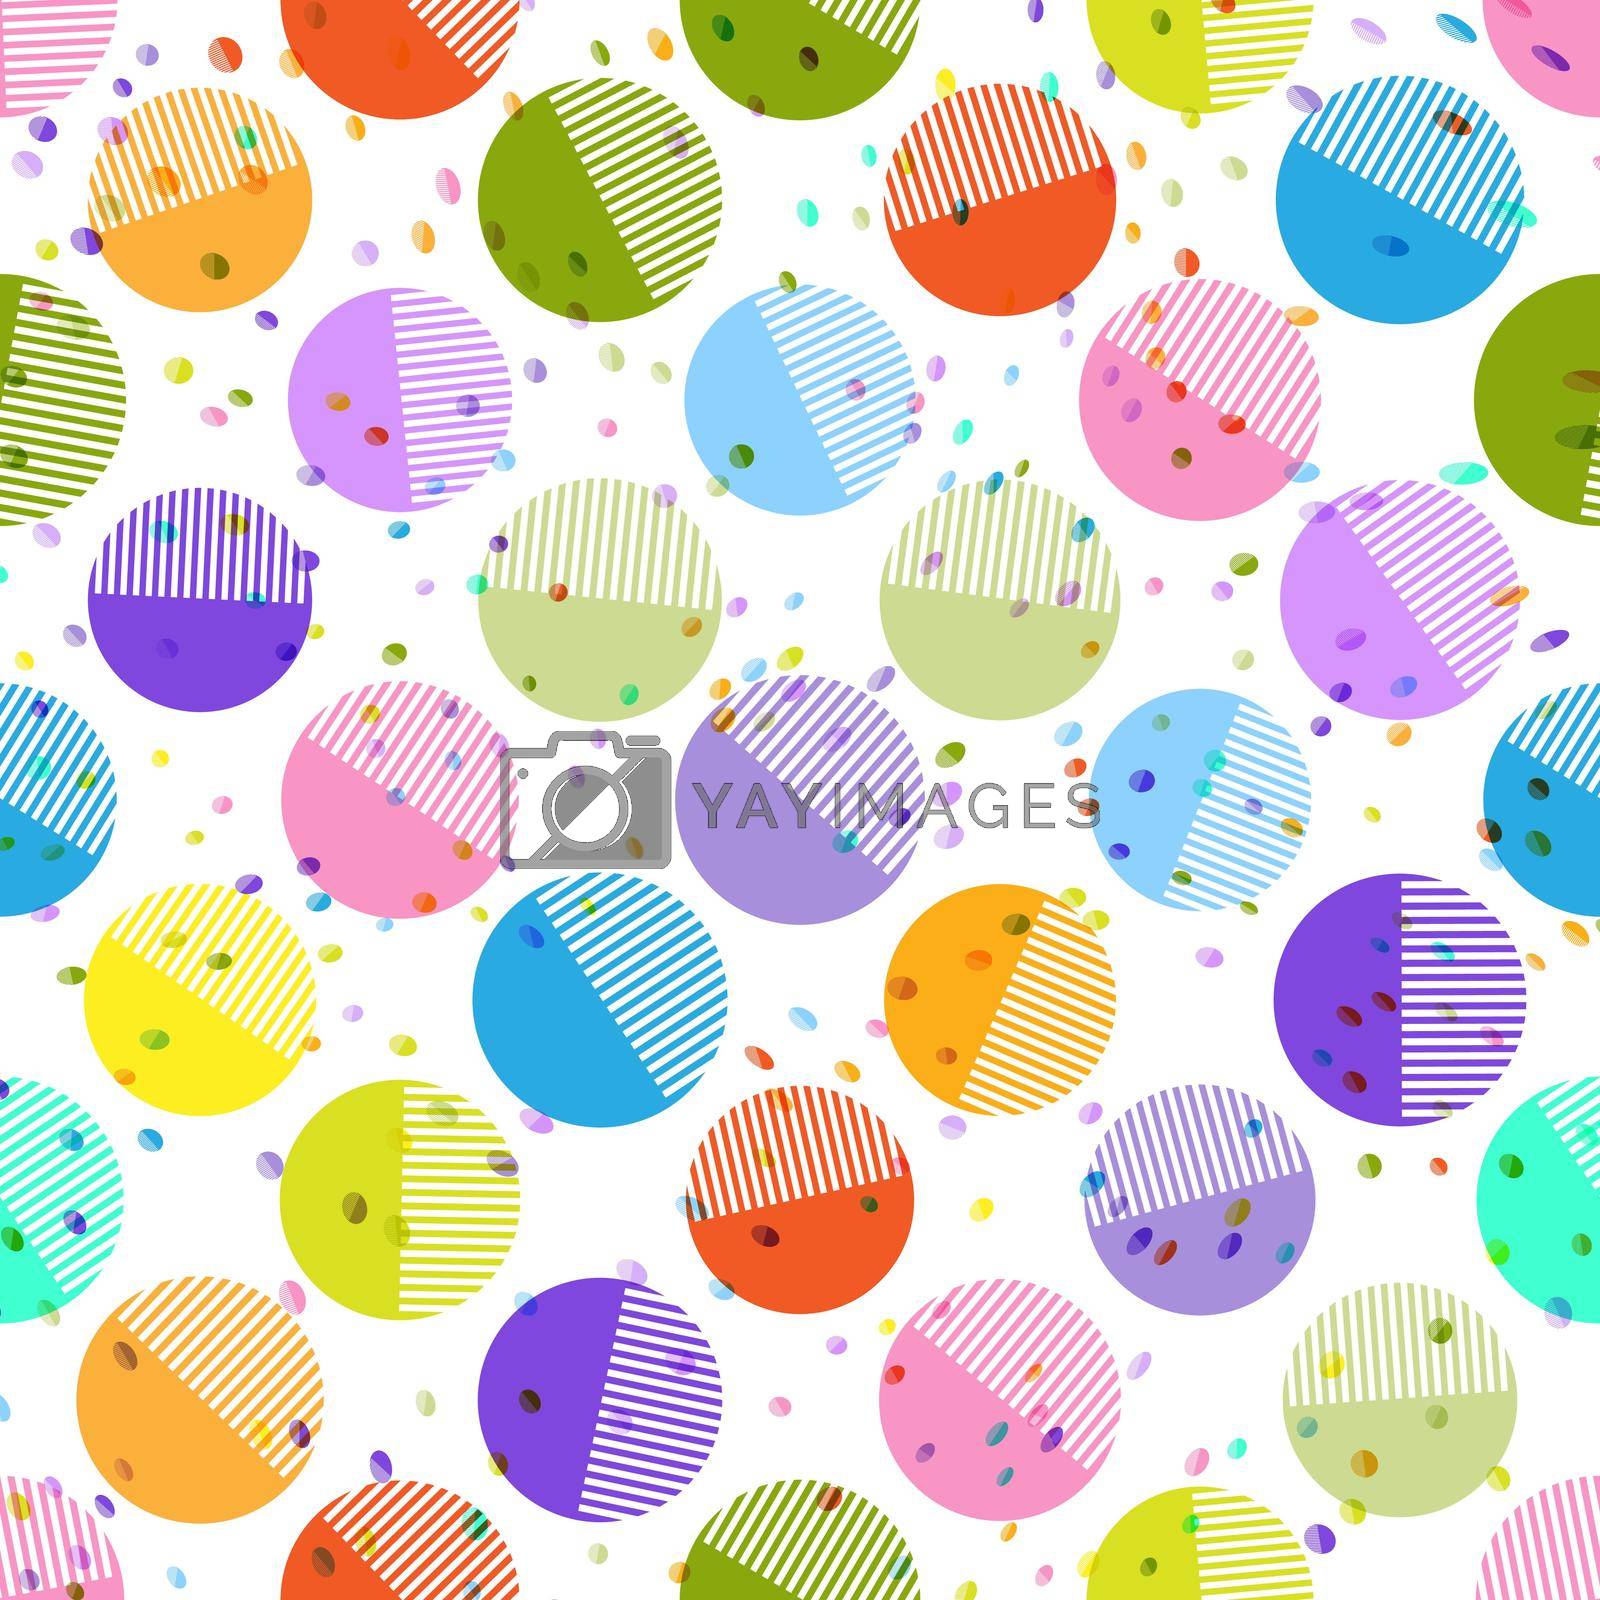 Royalty free image of Seamless geometric pattern with circles for texture, textiles, and simple backgrounds by Grommik